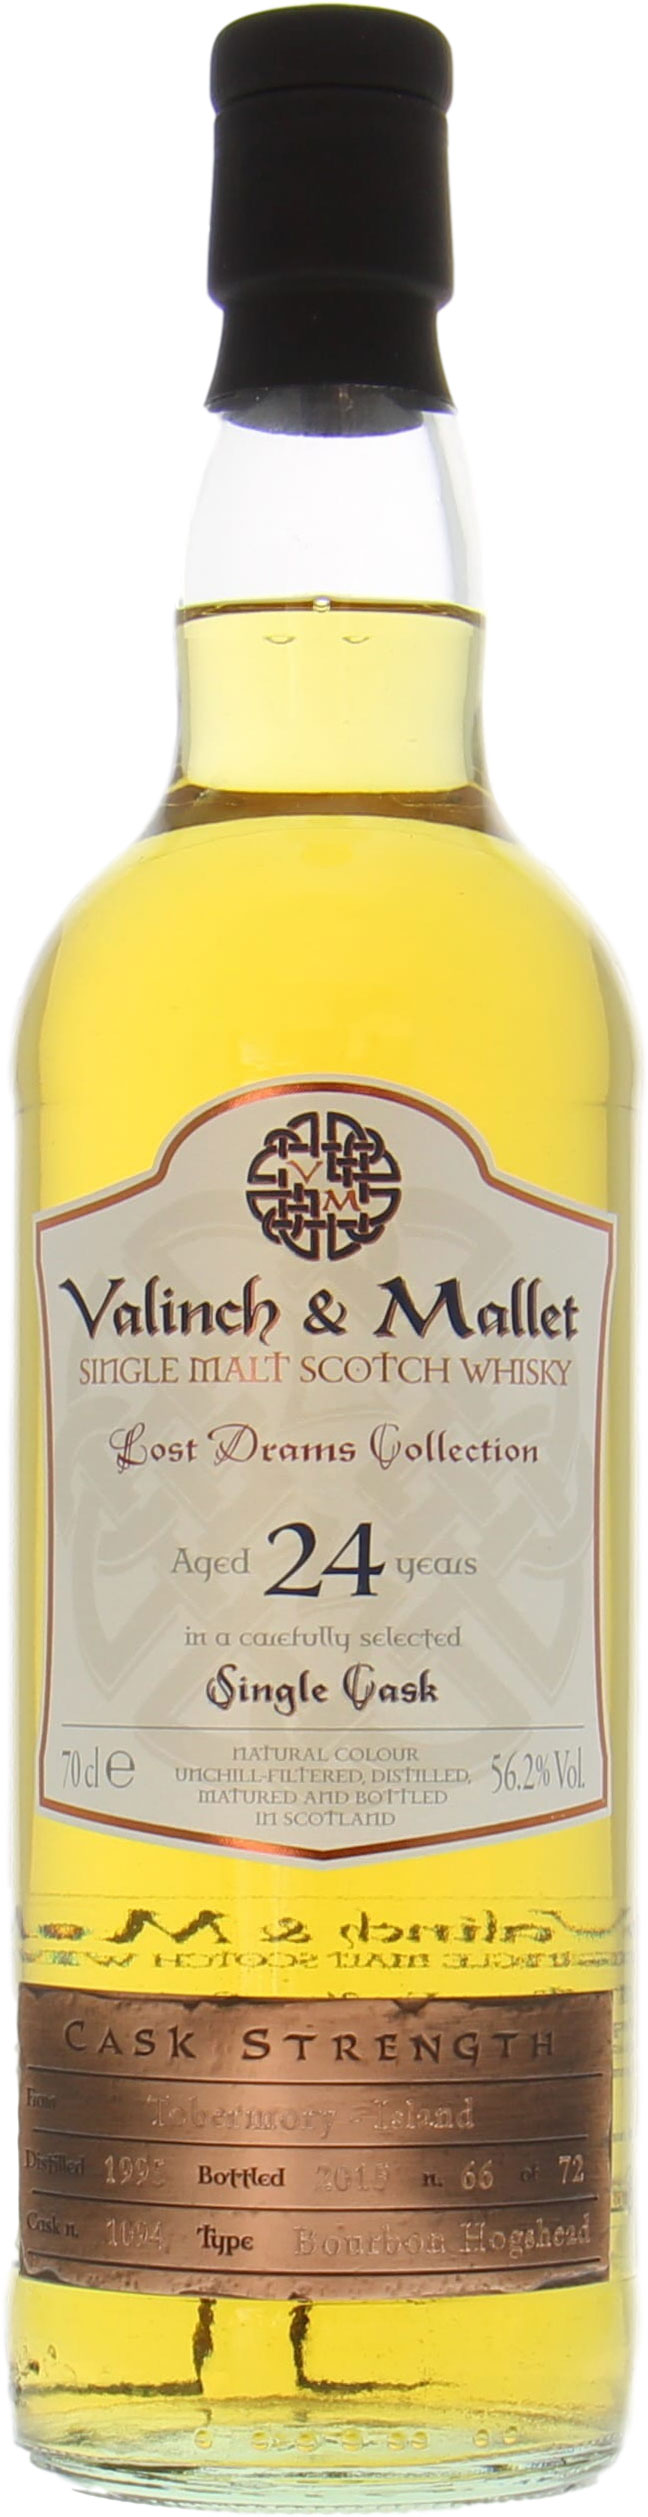 Tomatin - 24 Years Old Valinch & Mallet Cask 18822 56.2% 1990 Perfect